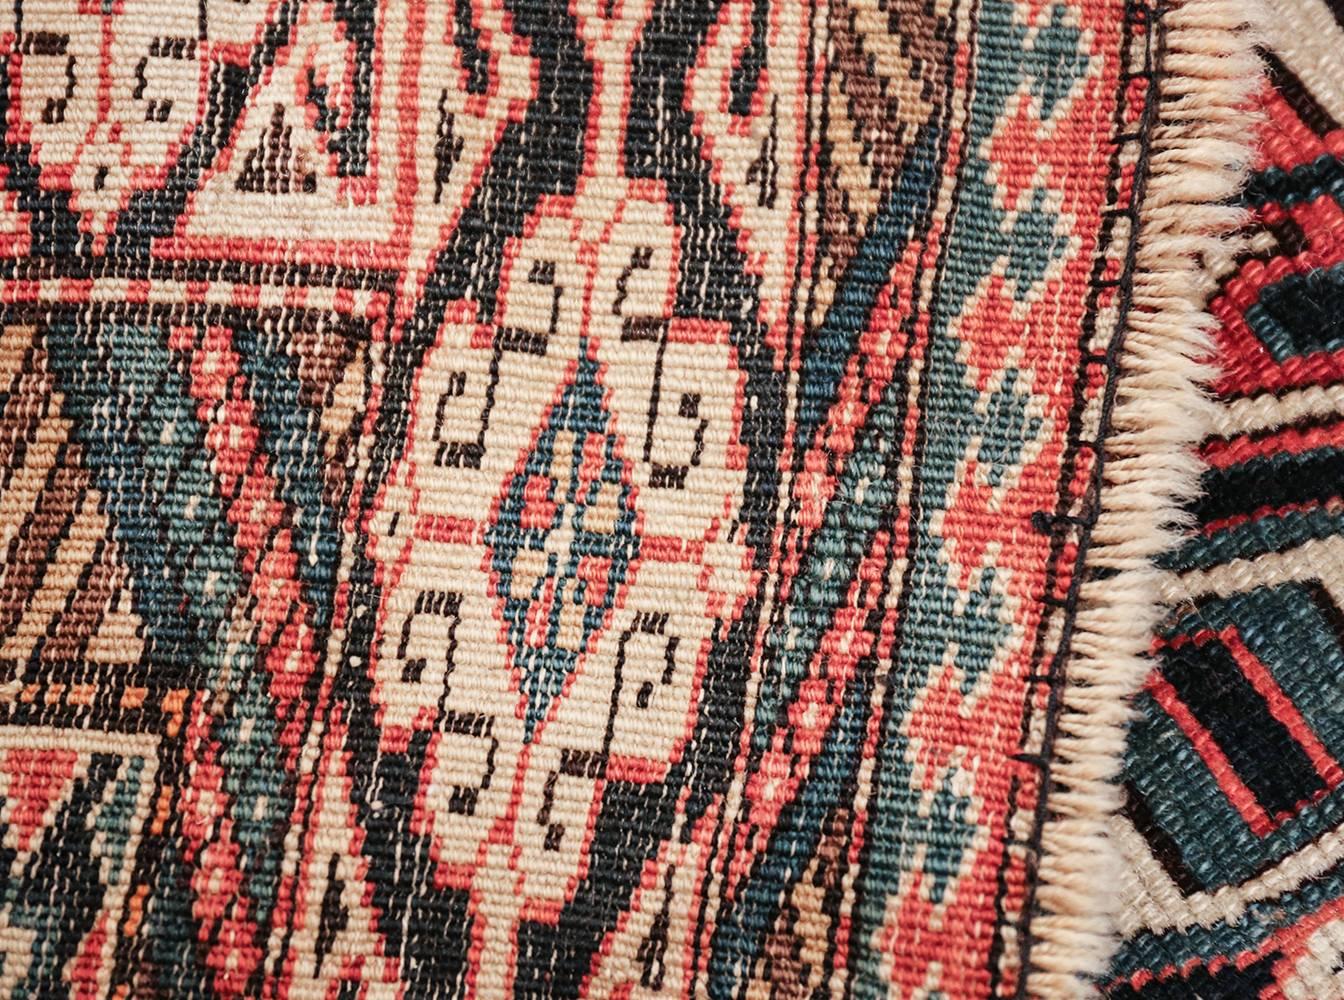 Beautiful Small Size Antique Tribal Perpedil Caucasian Rug, Country of Origin / Rug Type: Caucasian Rug, Circa Date: 1900 – This magnificent antique Caucasian rug is a beautiful Perpedil designed masterpiece.

Stunning symmetry characterizes the